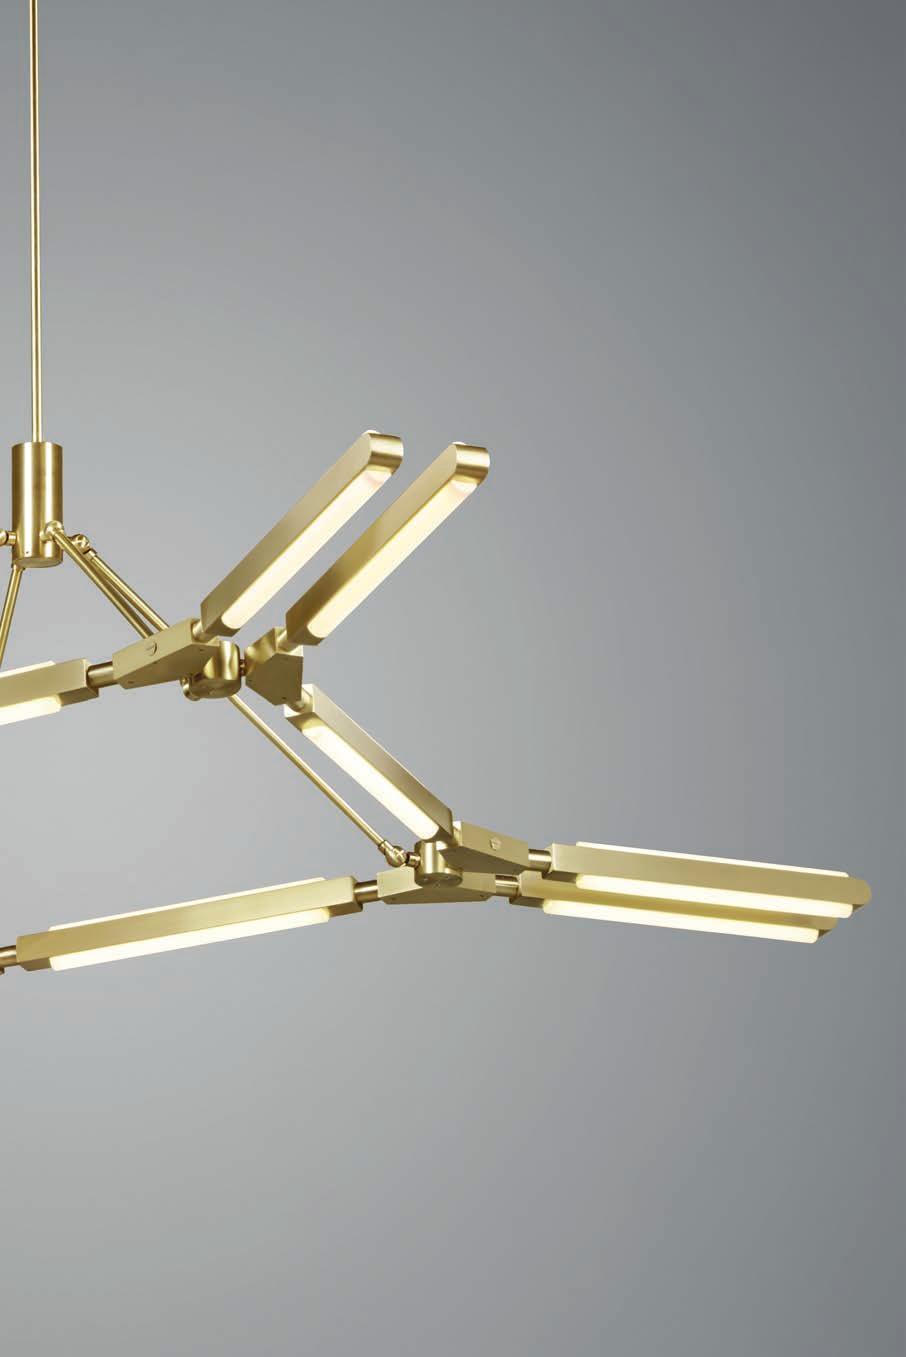 Each Pris fixture is created with a set of length-adjustable linear arms that attach to jewel-shaped connectors.